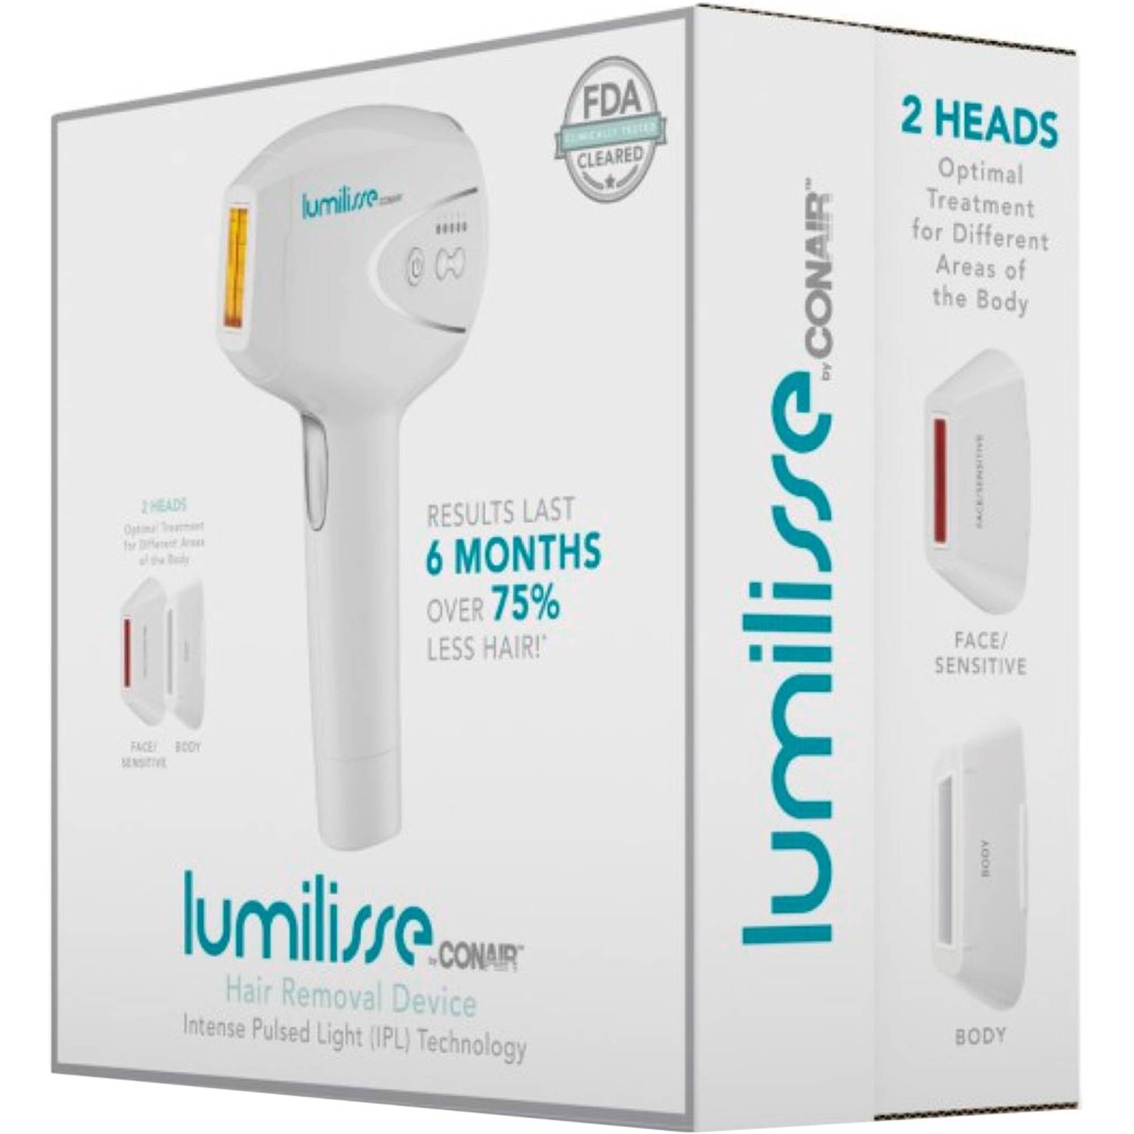 Conair Lumilisse Intense Pulsed Light Hair Removal Device - Image 9 of 10